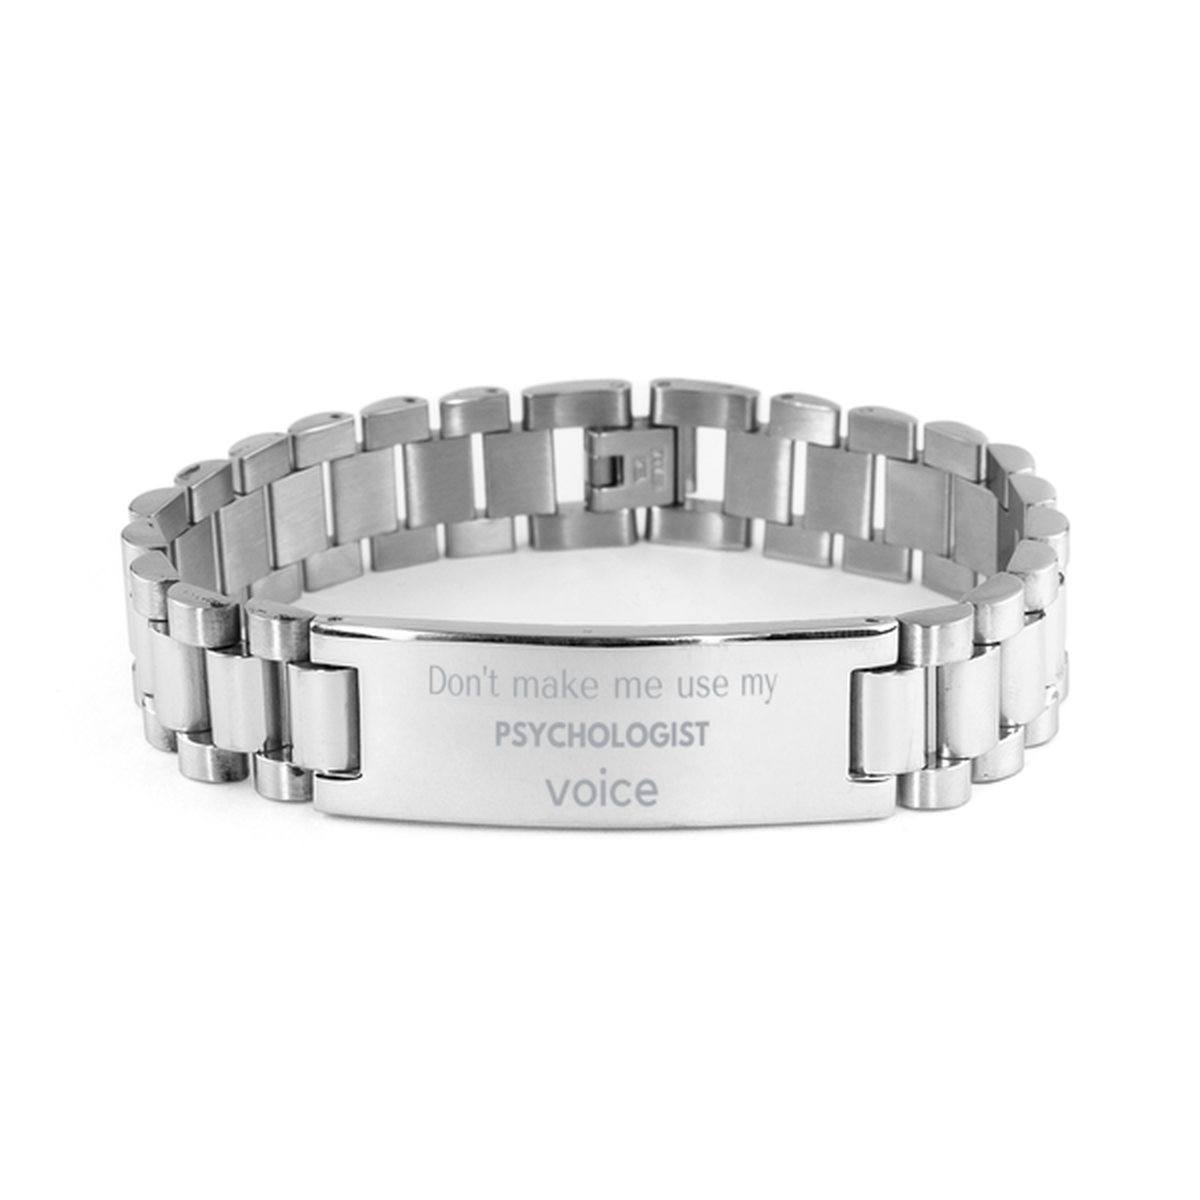 Don't make me use my Psychologist voice, Sarcasm Psychologist Gifts, Christmas Psychologist Ladder Stainless Steel Bracelet Birthday Unique Gifts For Psychologist Coworkers, Men, Women, Colleague, Friends